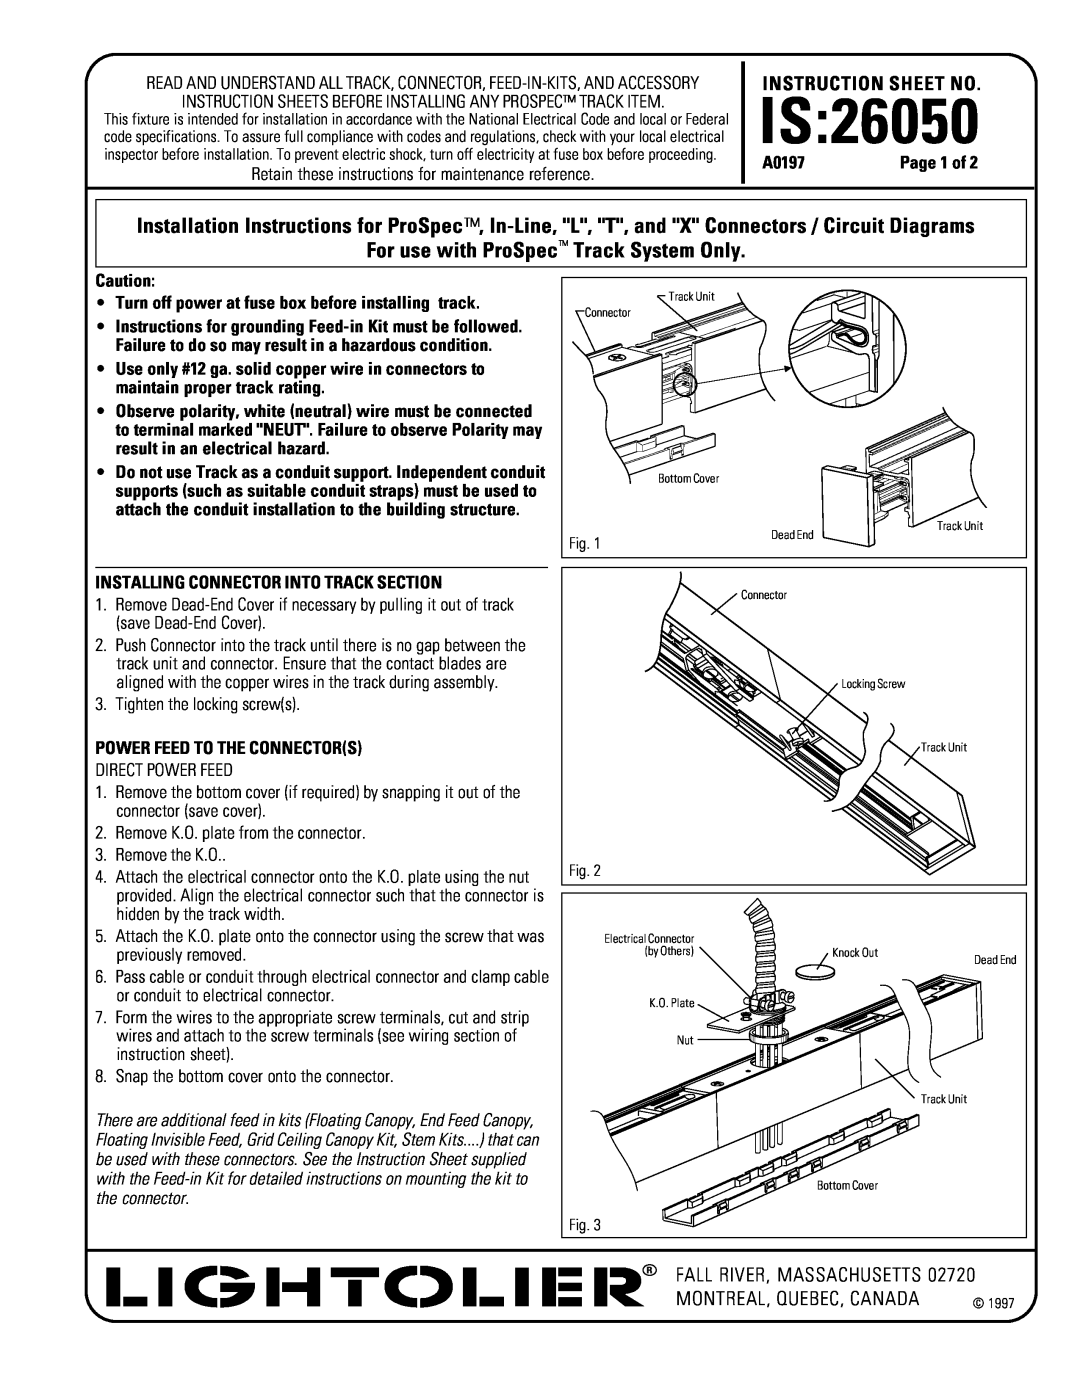 Lightolier 26050 instruction sheet Is, For use with ProSpec Track System Only, Instruction Sheet No, A0197 